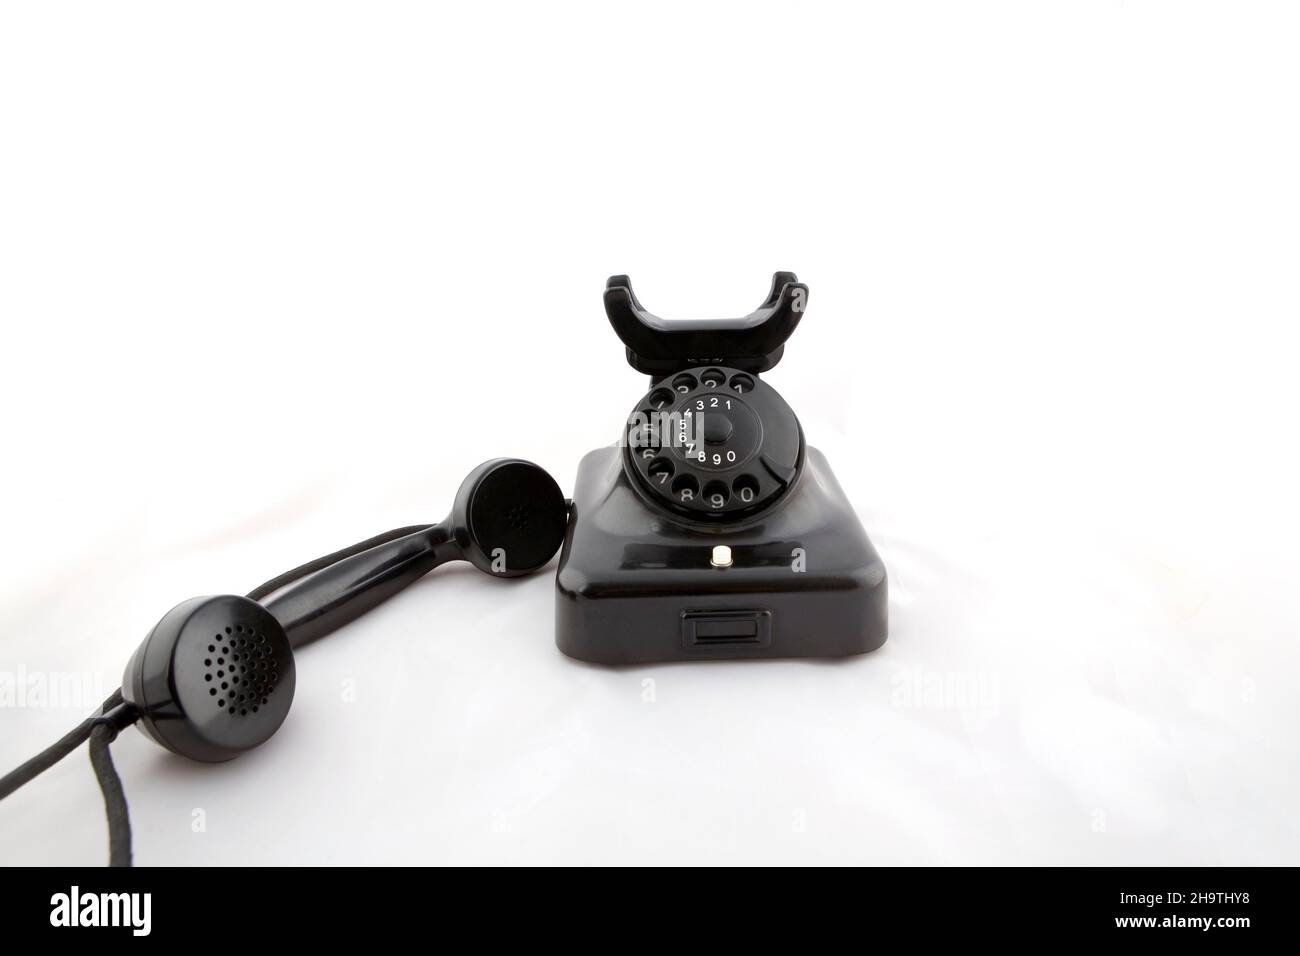 old black rotary phone, cut out Stock Photo